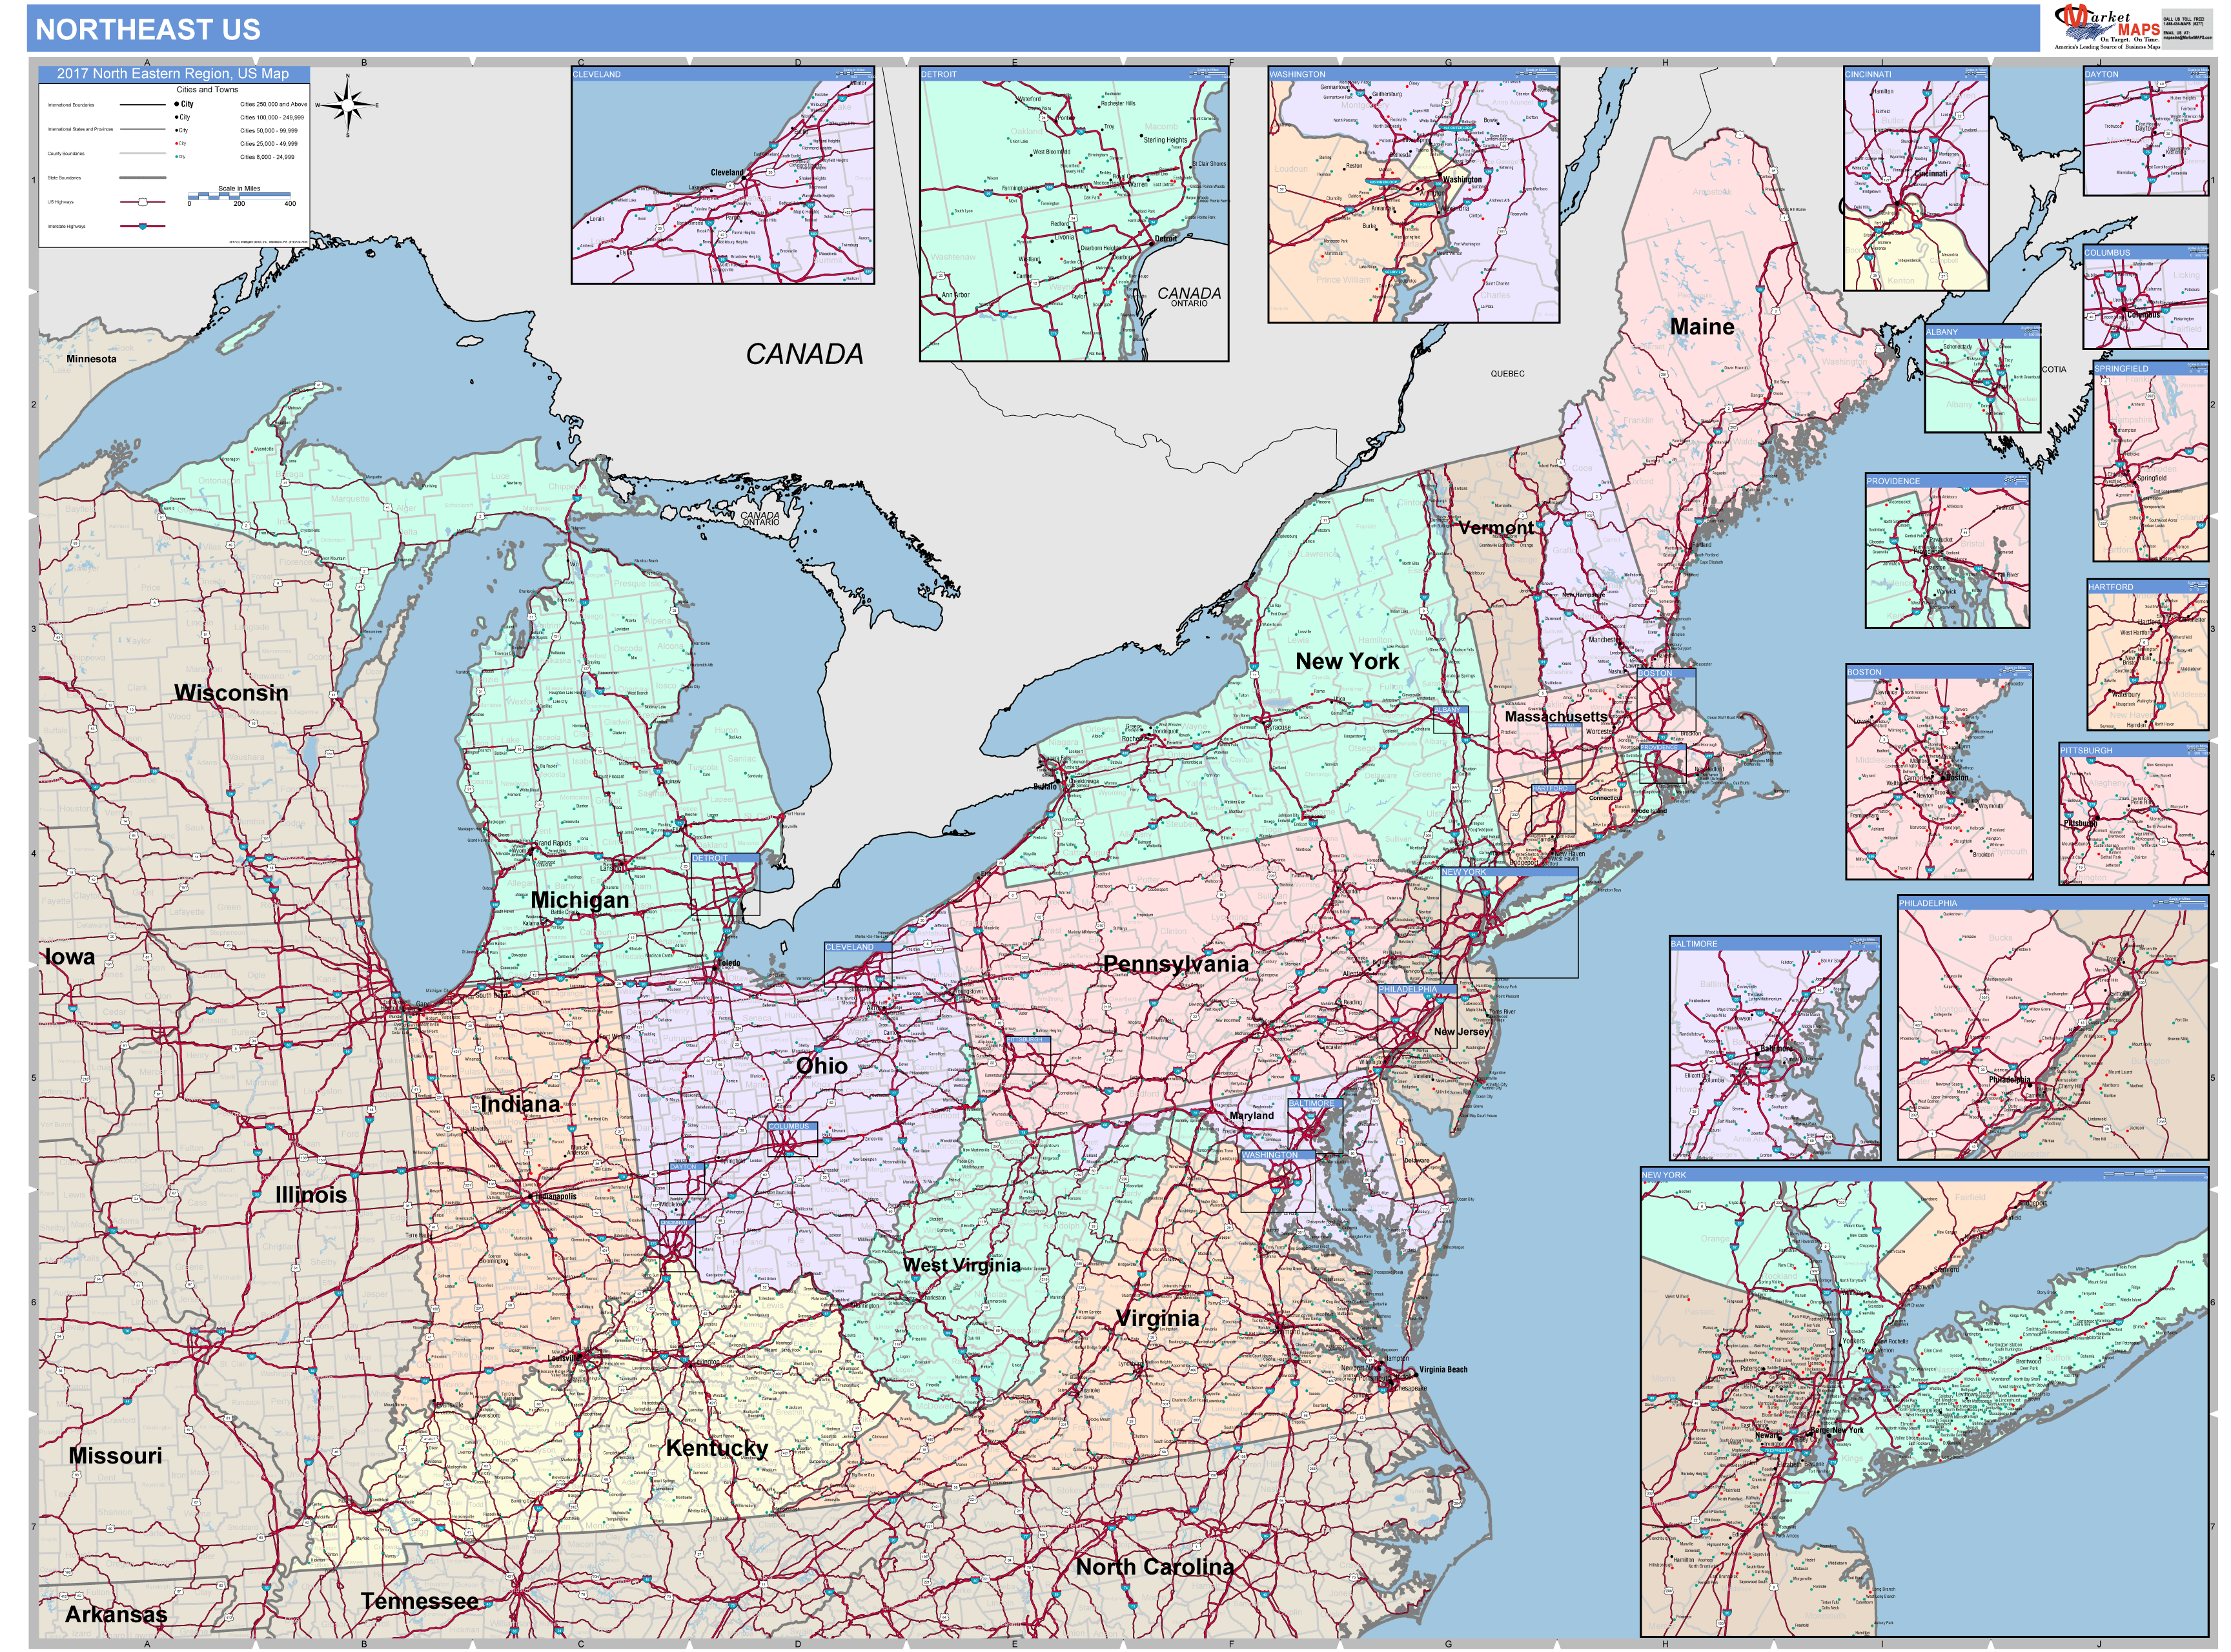 us-northeast-regional-wall-map-color-cast-style-by-marketmaps-mapsales